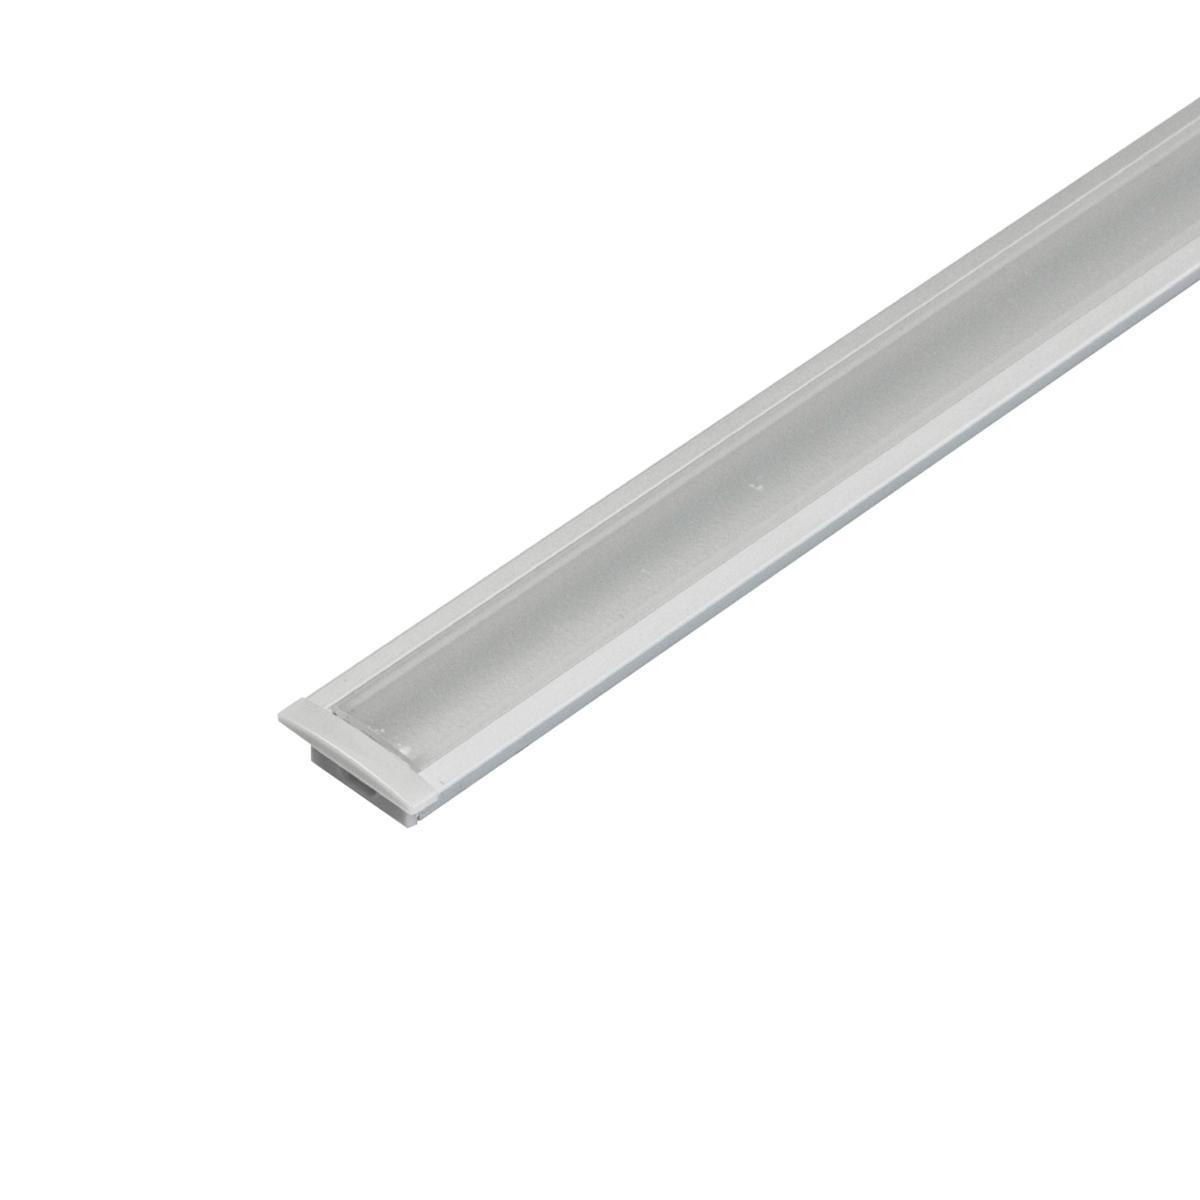 4ft Aluminum Channel for LED Strip and Tape Light Wide Recessed Mount